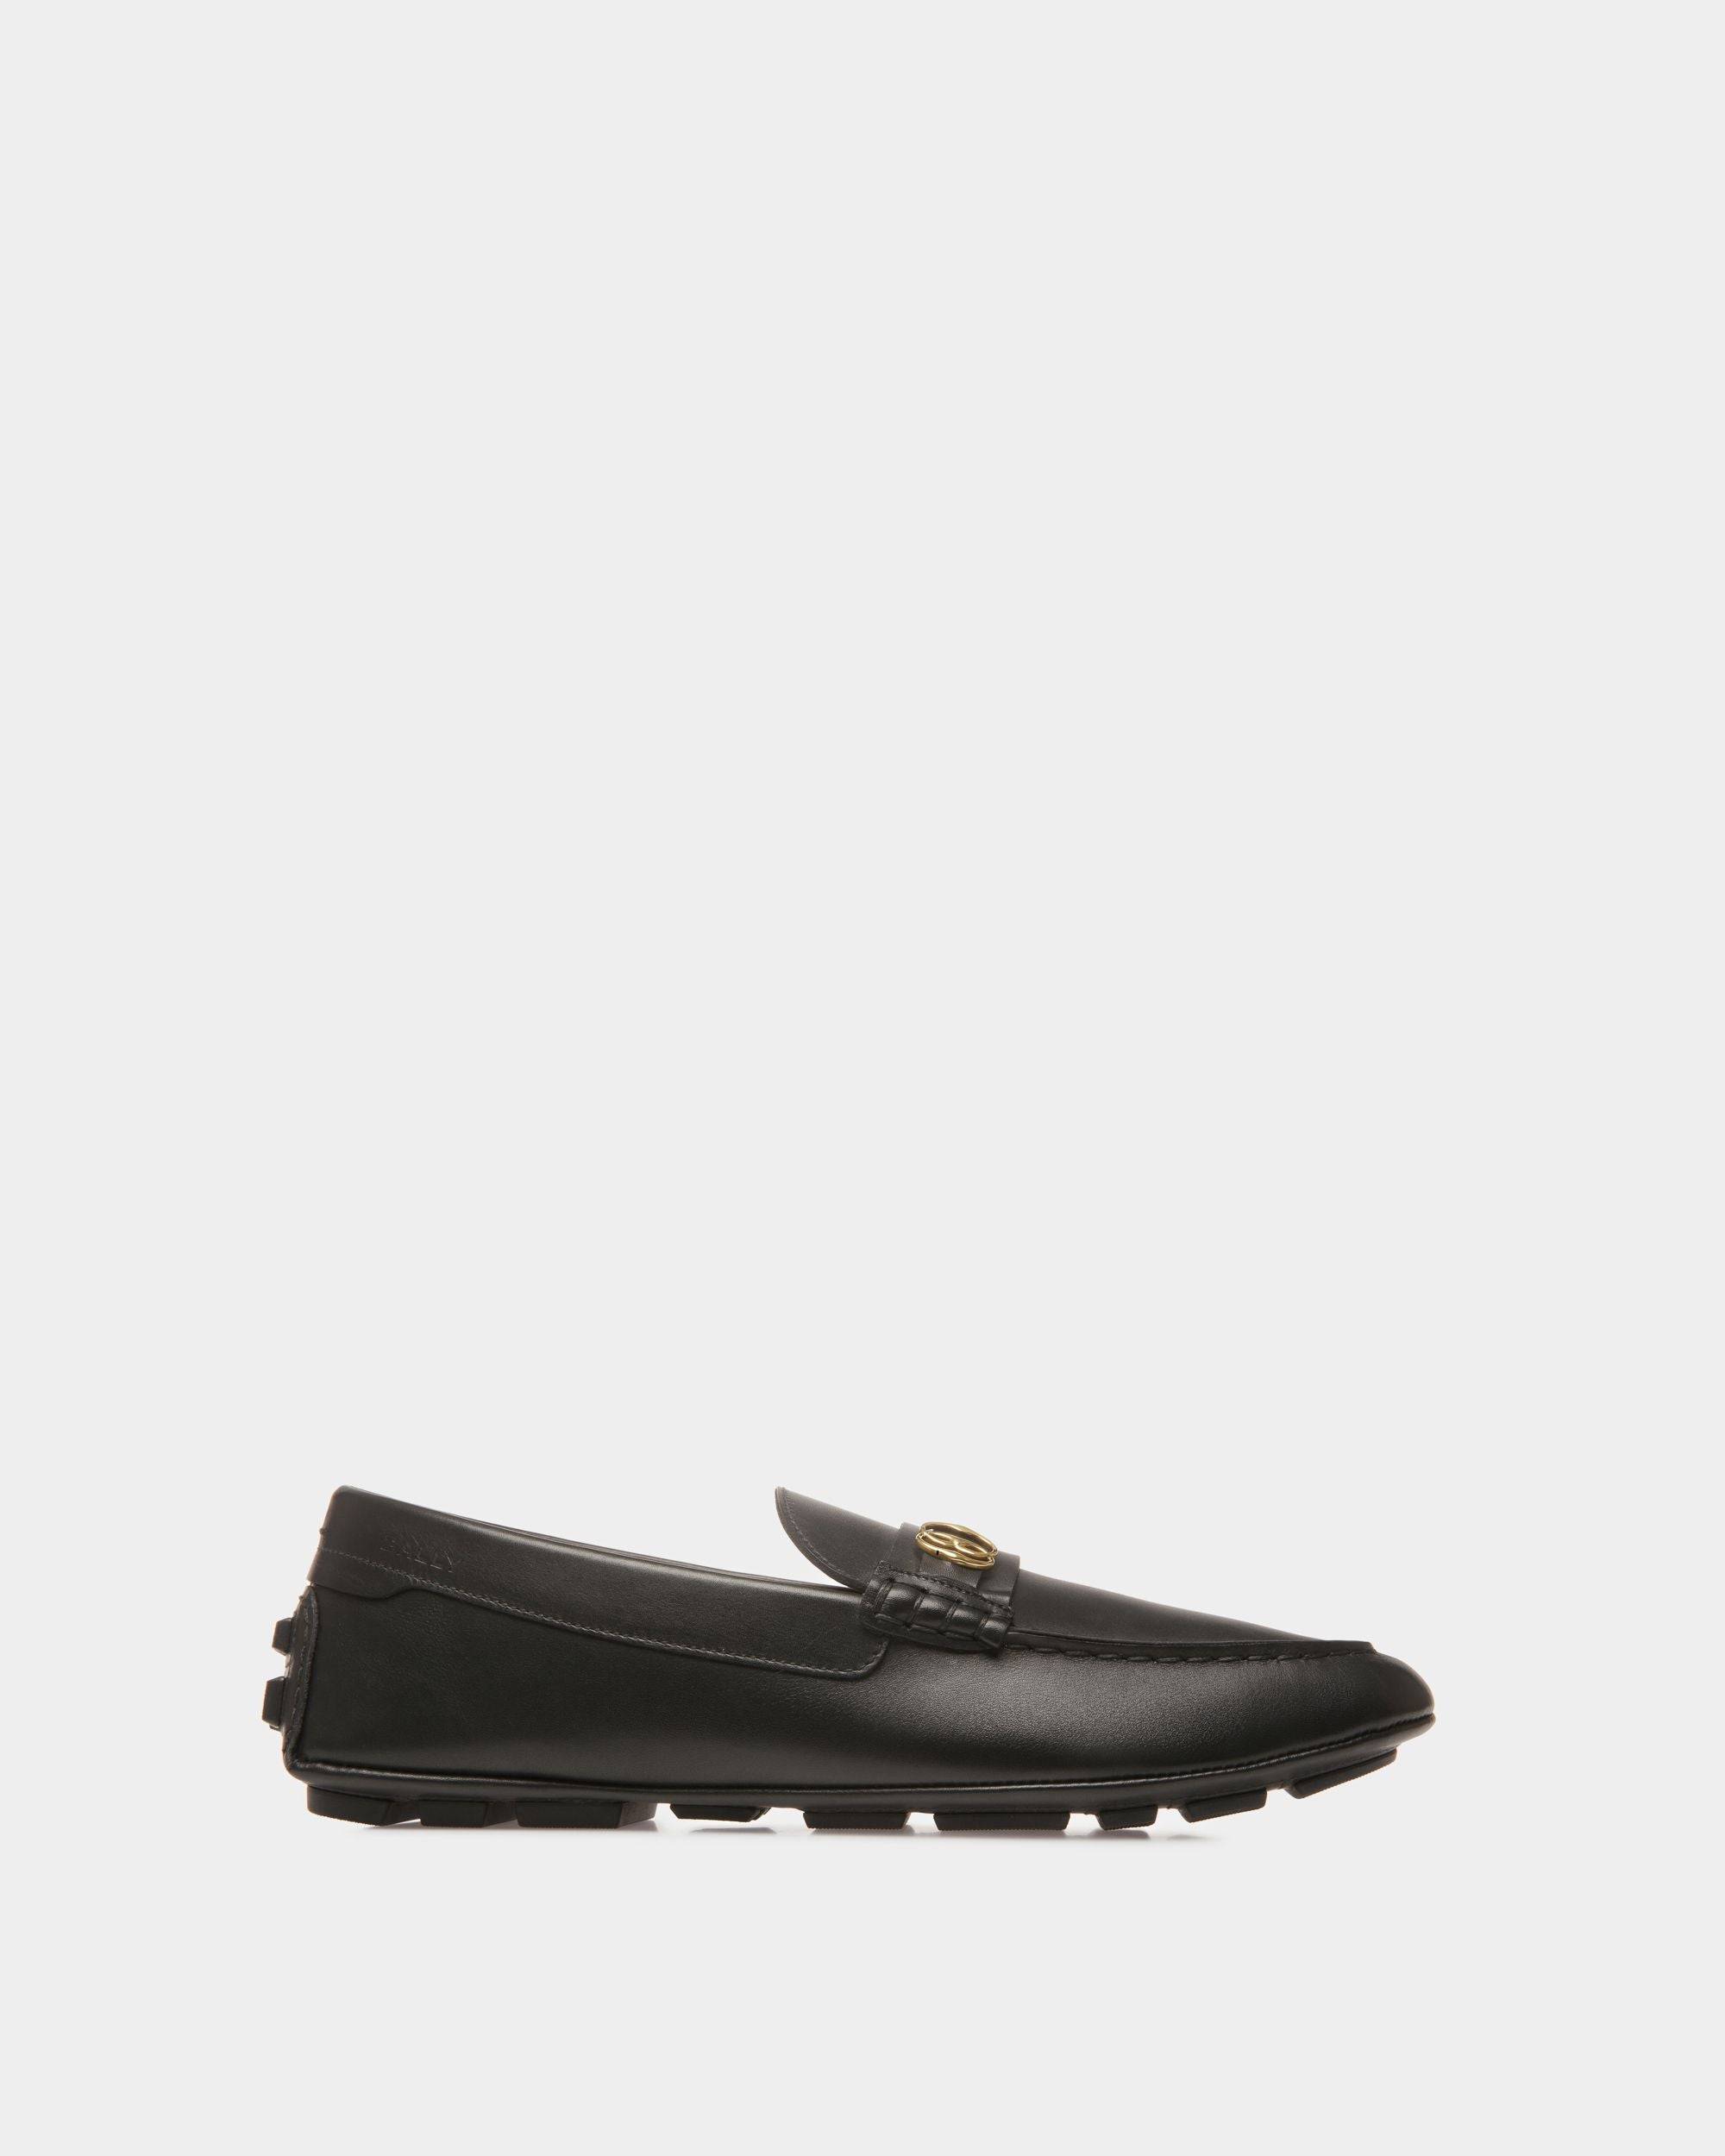 Men's Kerbs Drivers In Black Leather | Bally | Still Life Side